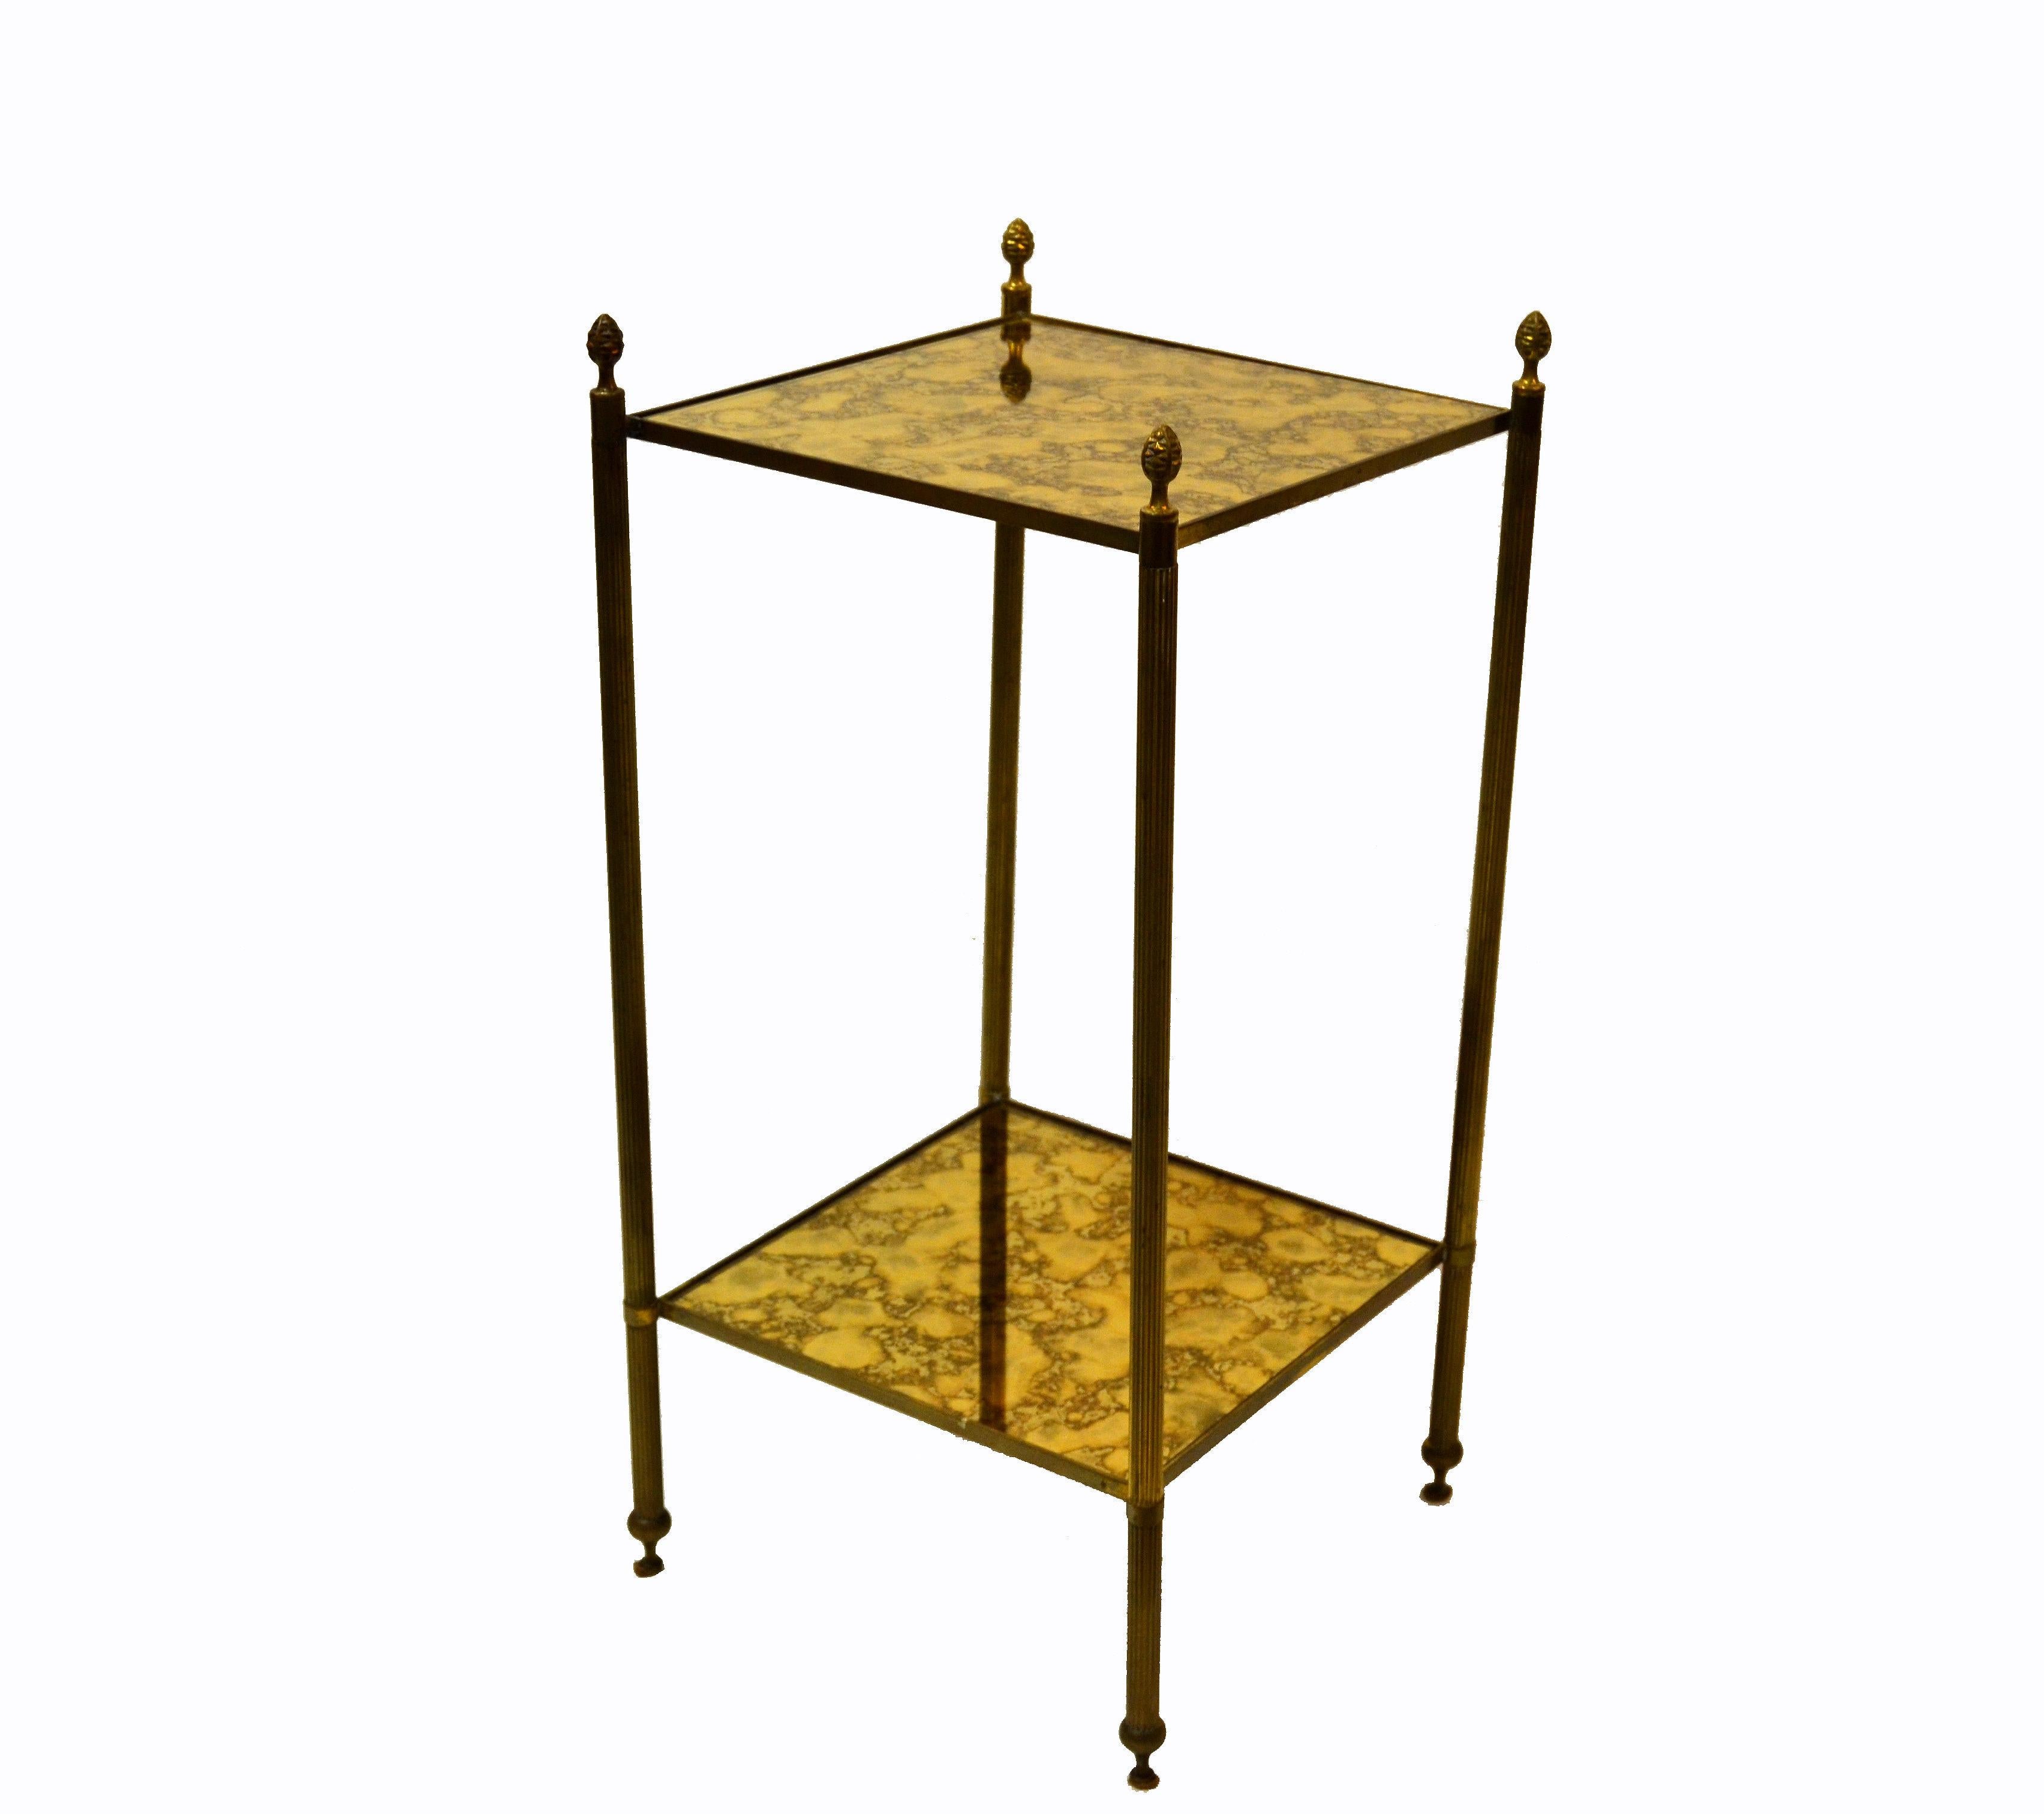 Original  Pair of Maison Baguès neoclassical brass square side table with two mirrored antique golden cloudy glass tops.
Space between 1st and 2nd tier, measures: height 17.63 inches.
Priced individually 